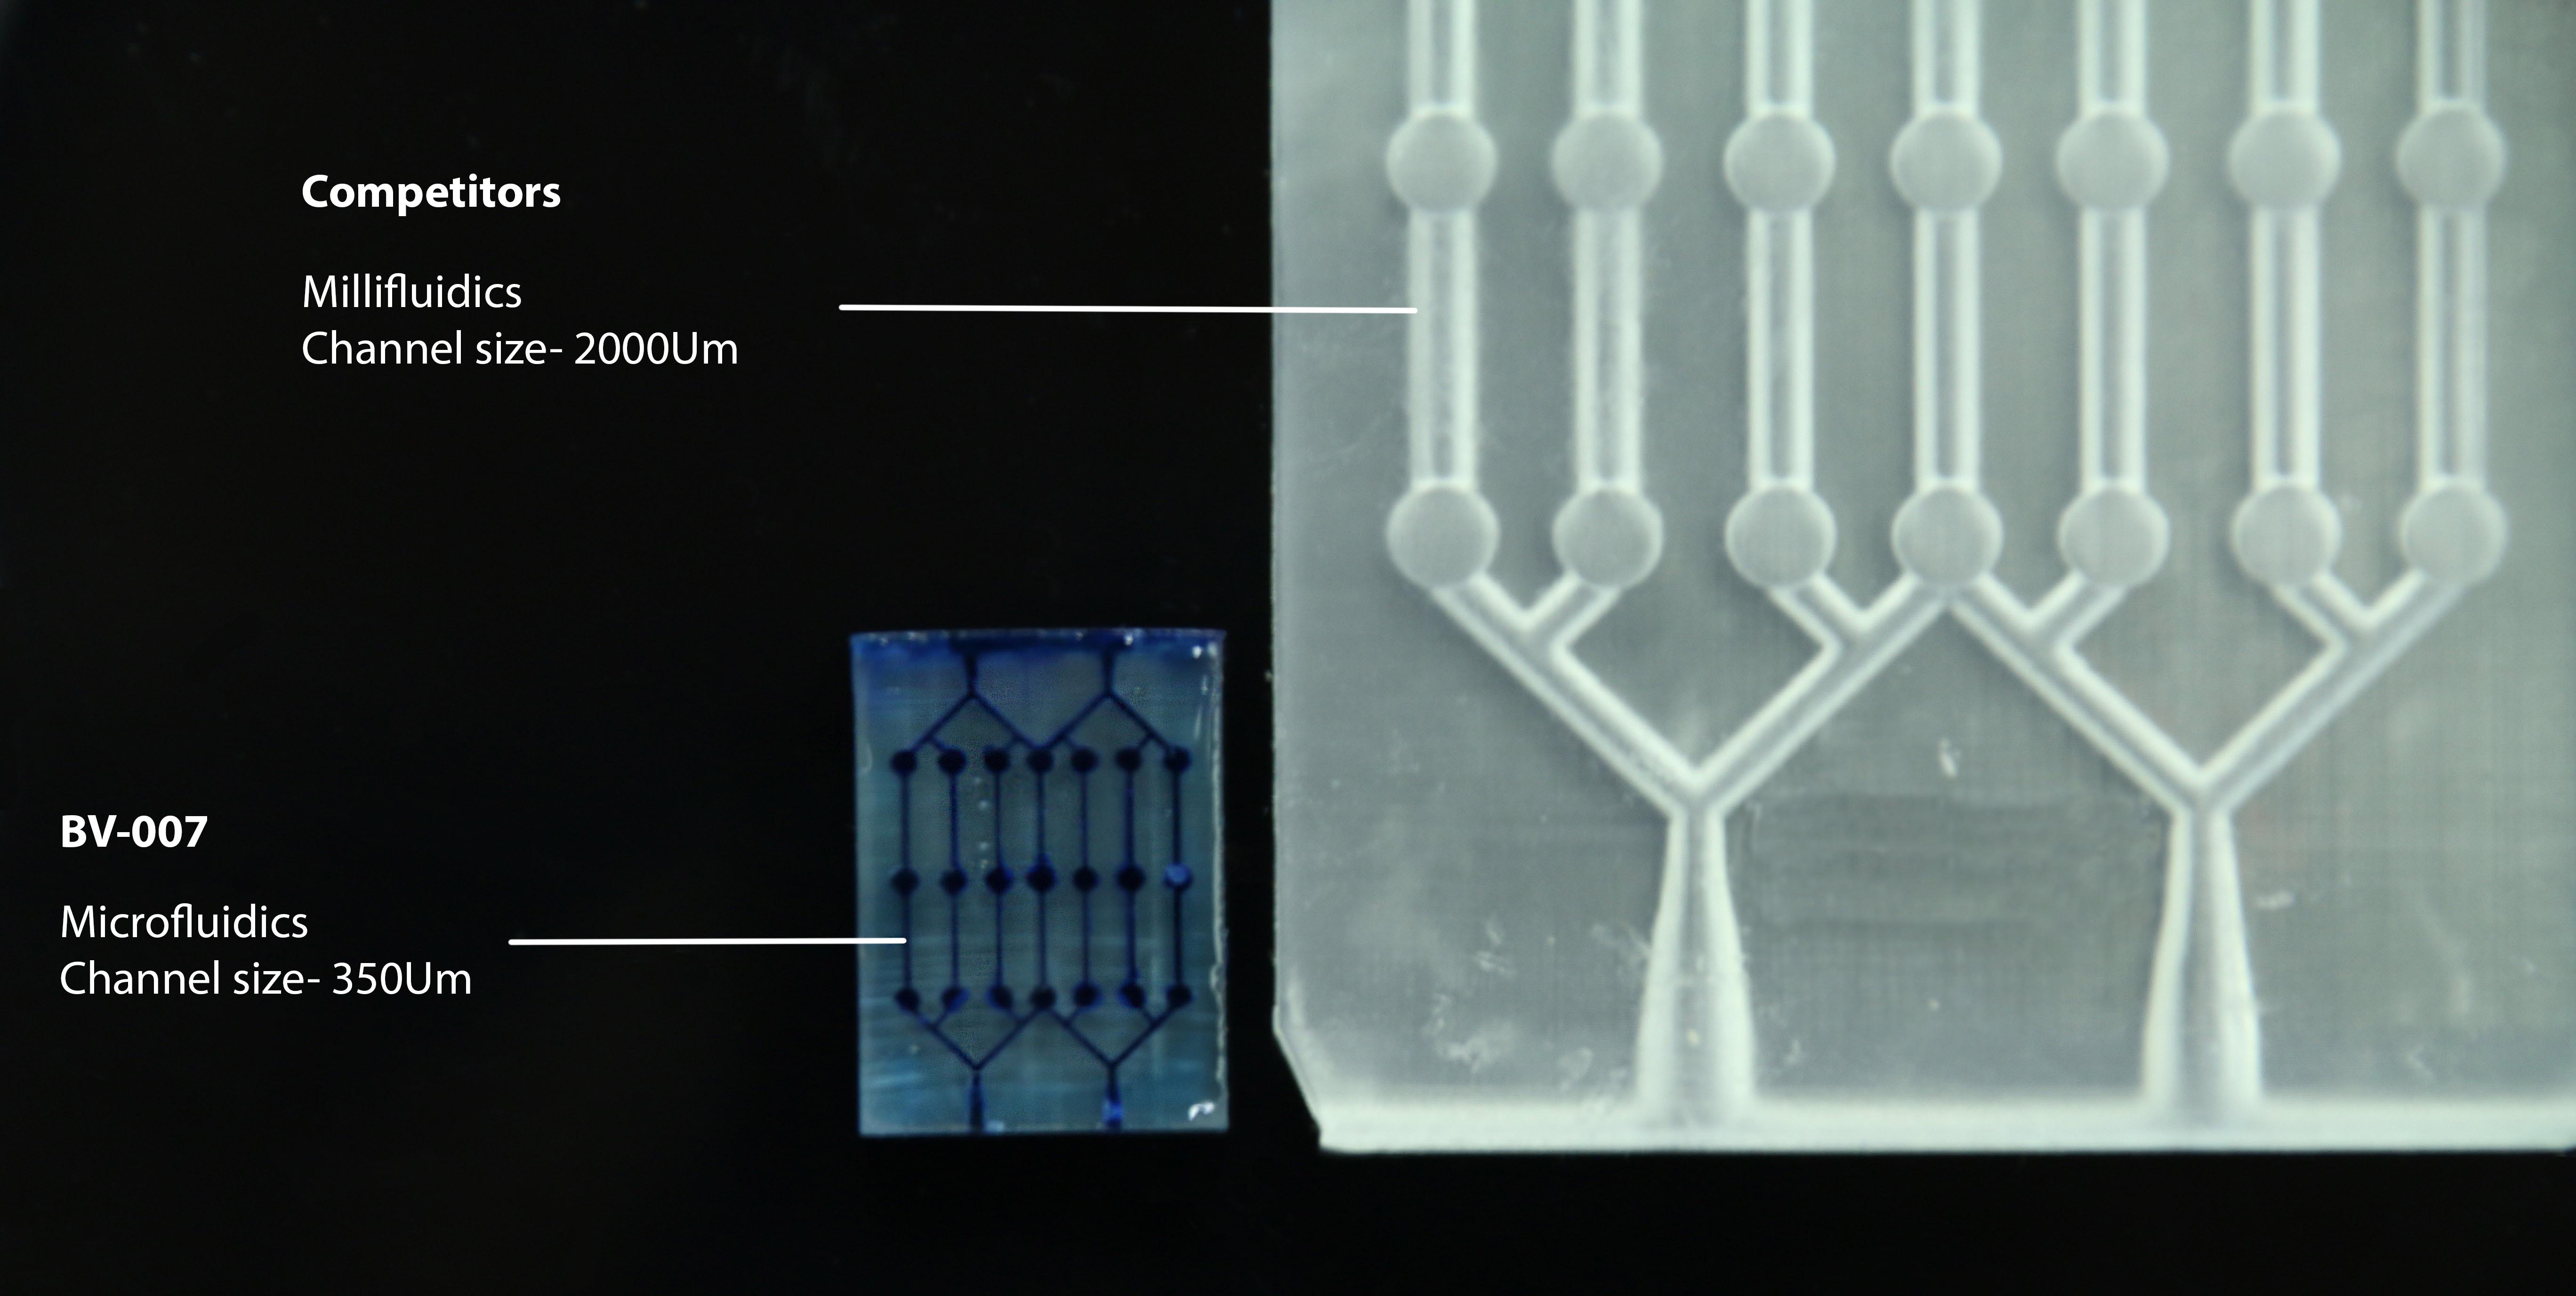 Comparing the size difference between a microfluidic and millifluidic device